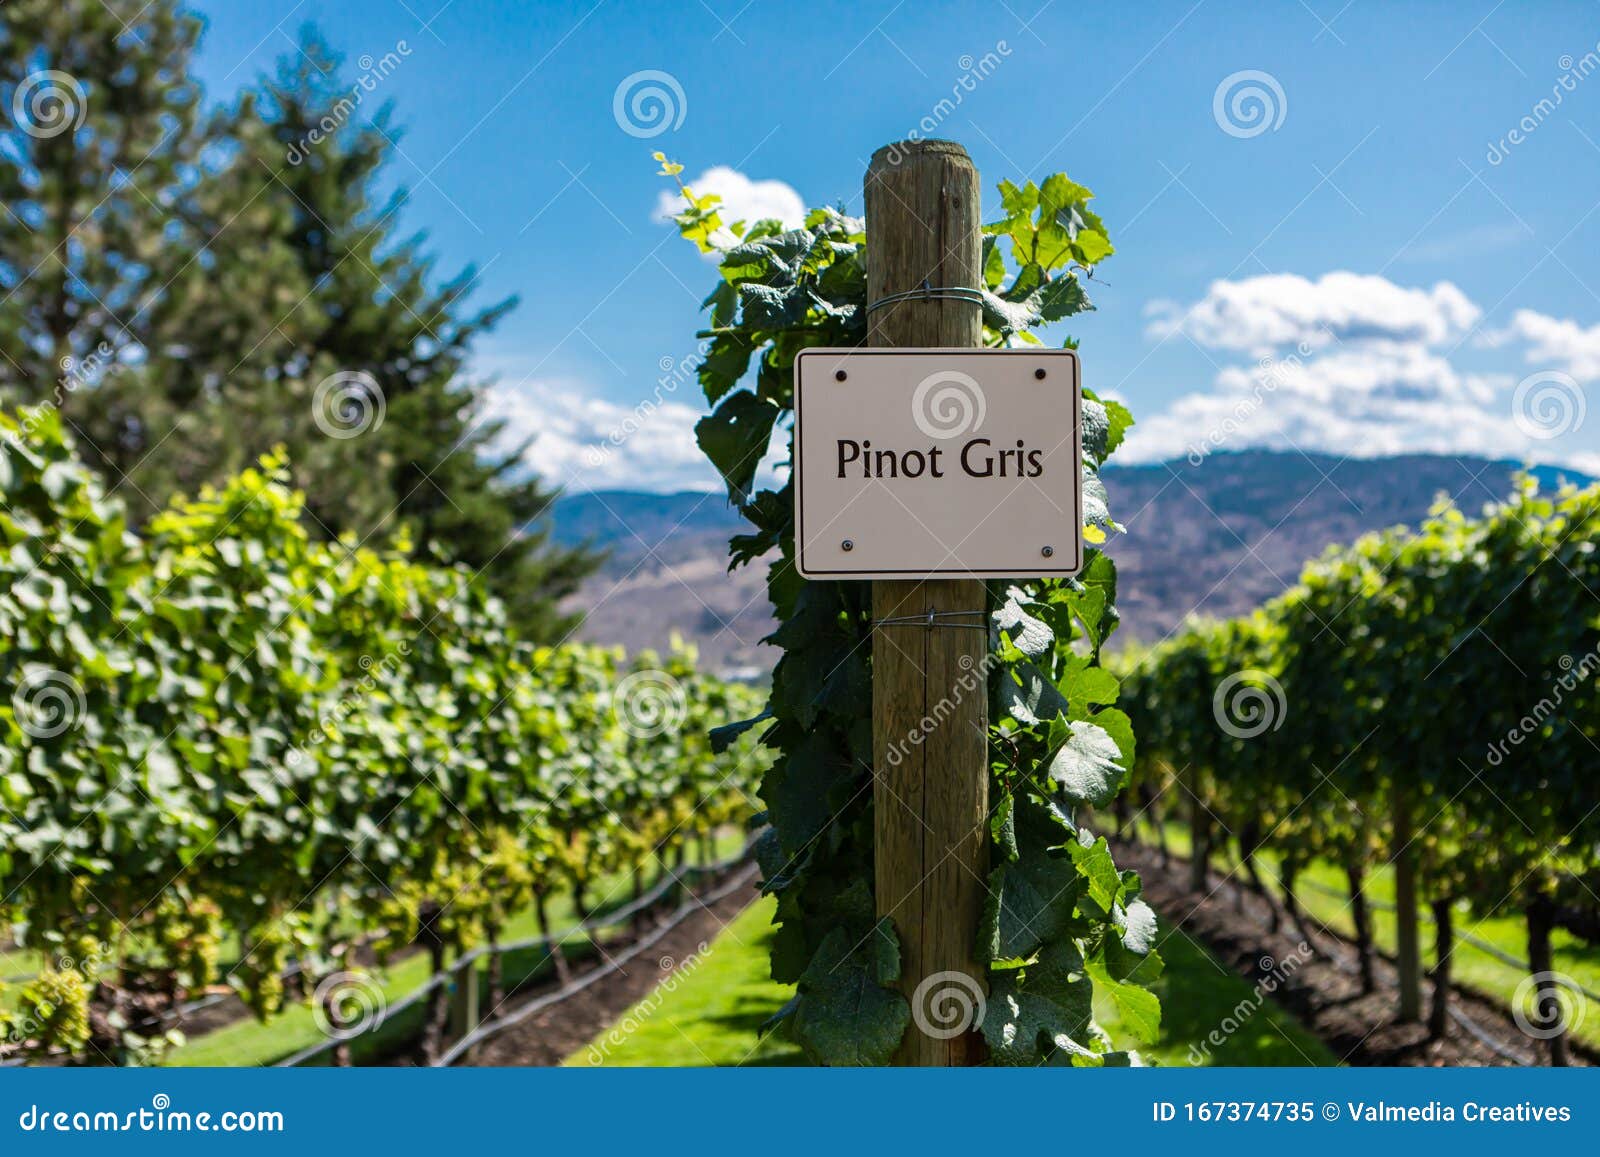 row of commercial pinot gris grapes